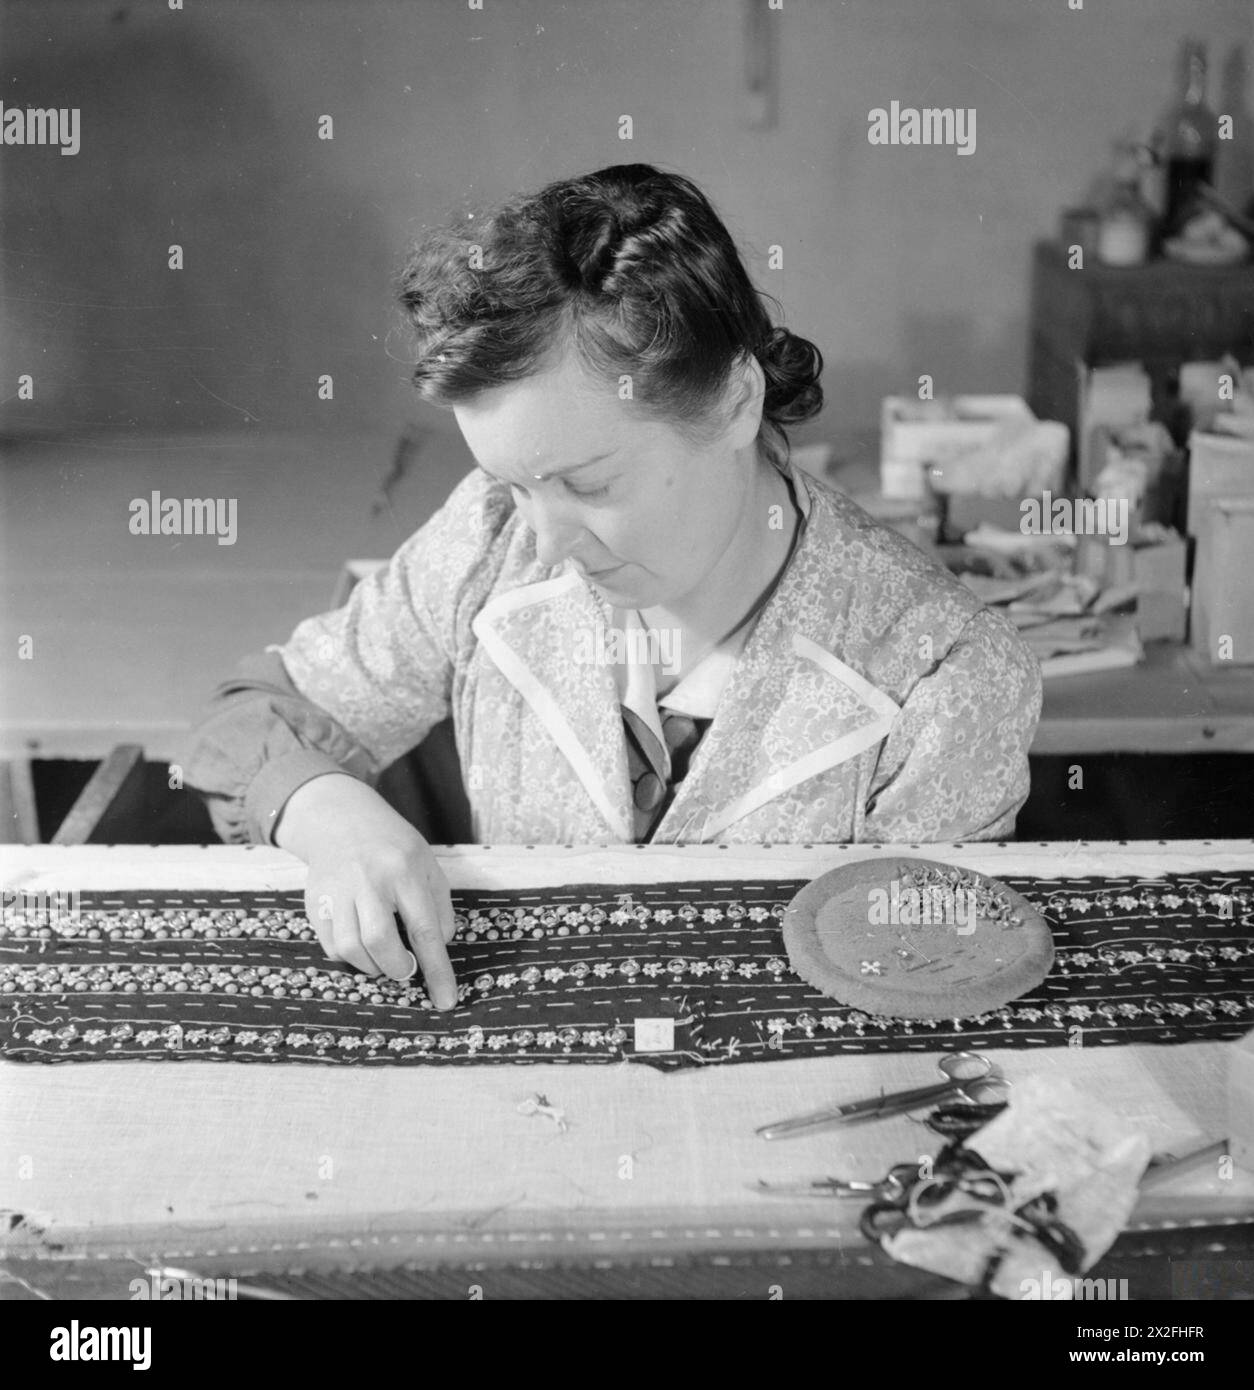 LONDON FASHION DESIGNERS: THE WORK OF MEMBERS OF THE INCORPORATED SOCIETY OF LONDON FASHION DESIGNERS IN WARTIME, LONDON, ENGLAND, UK, 1944 - In the workrooms of the fashion designer Norman Hartnell in London, a skilled worker applies by hand blue and gold studs in strips to fabric which is to be used for a black velvet evening gown Stock Photo